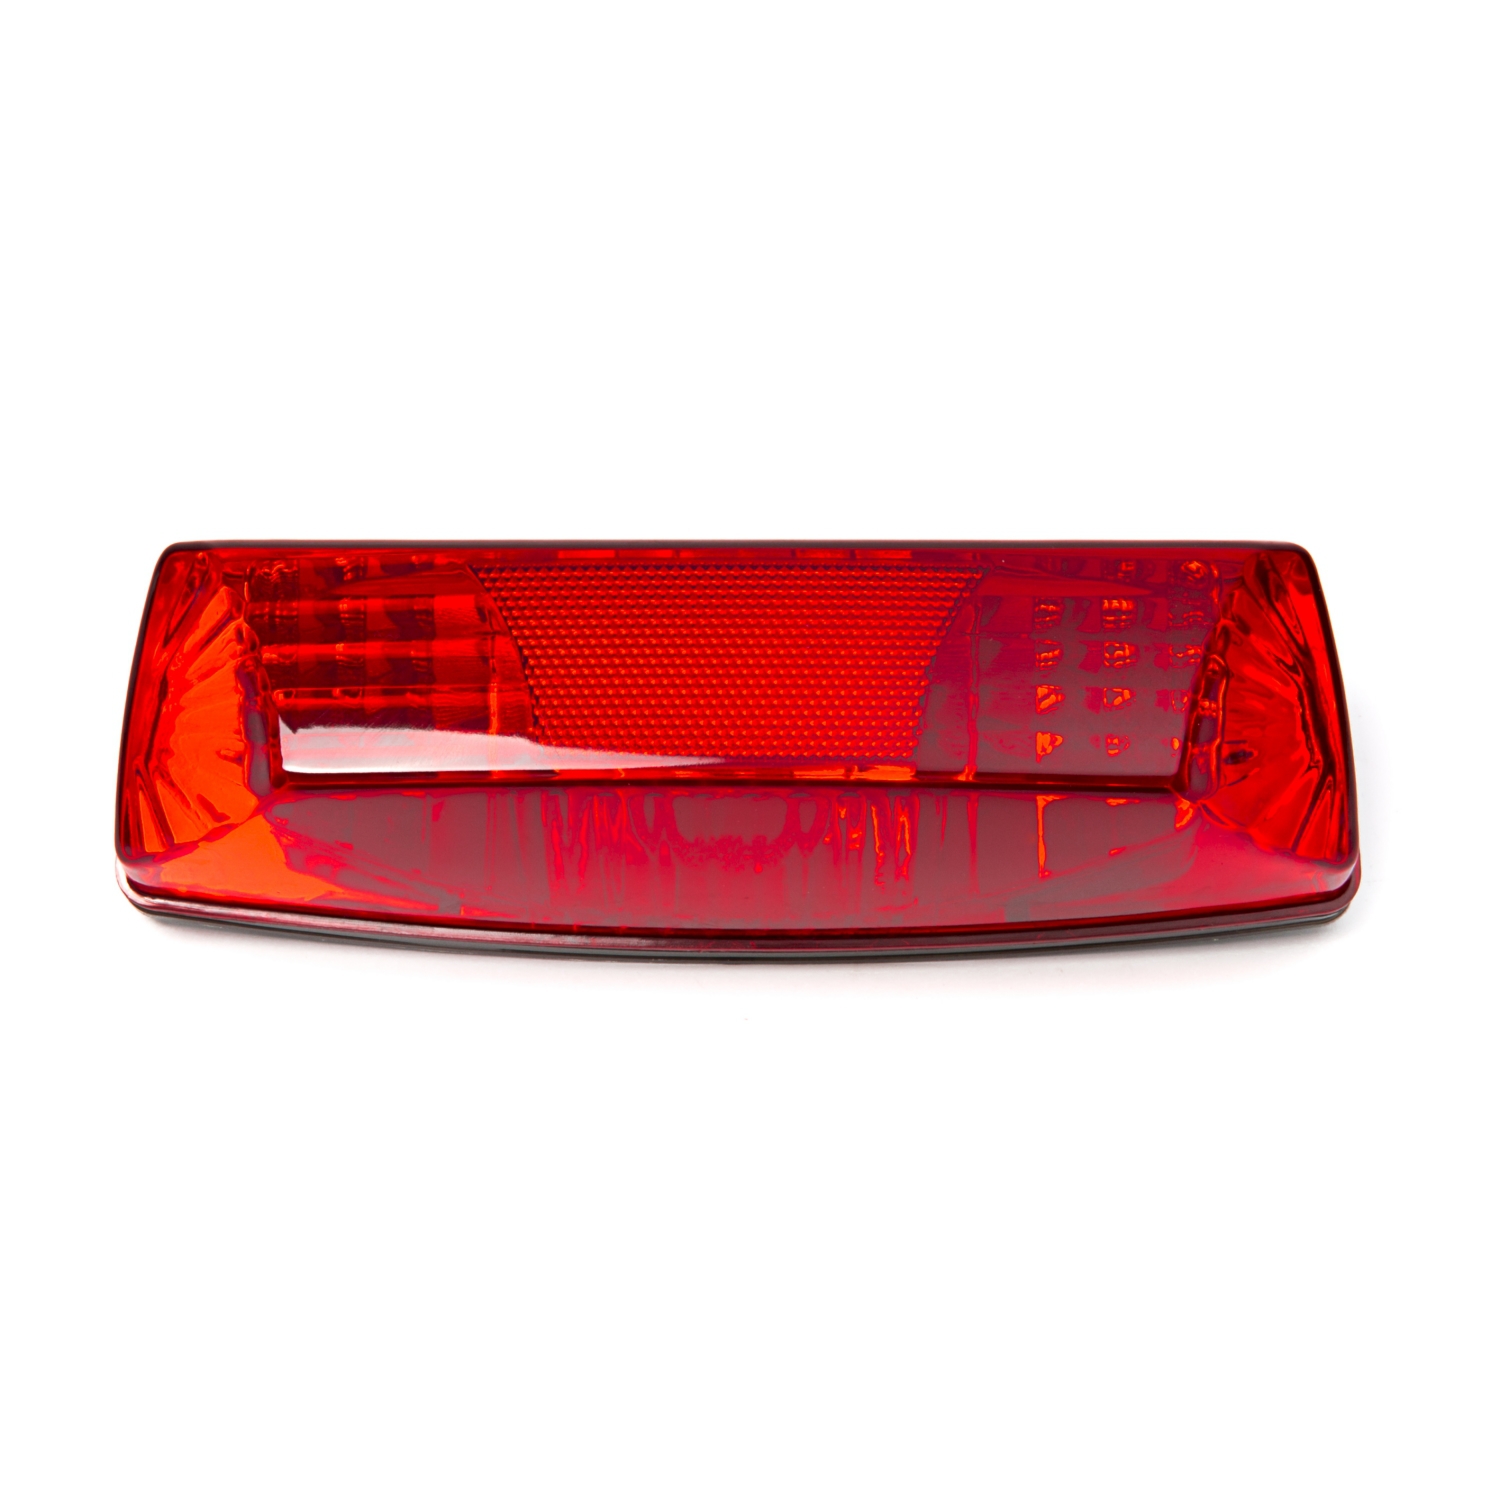 Kimpex Taillight Lens 280337